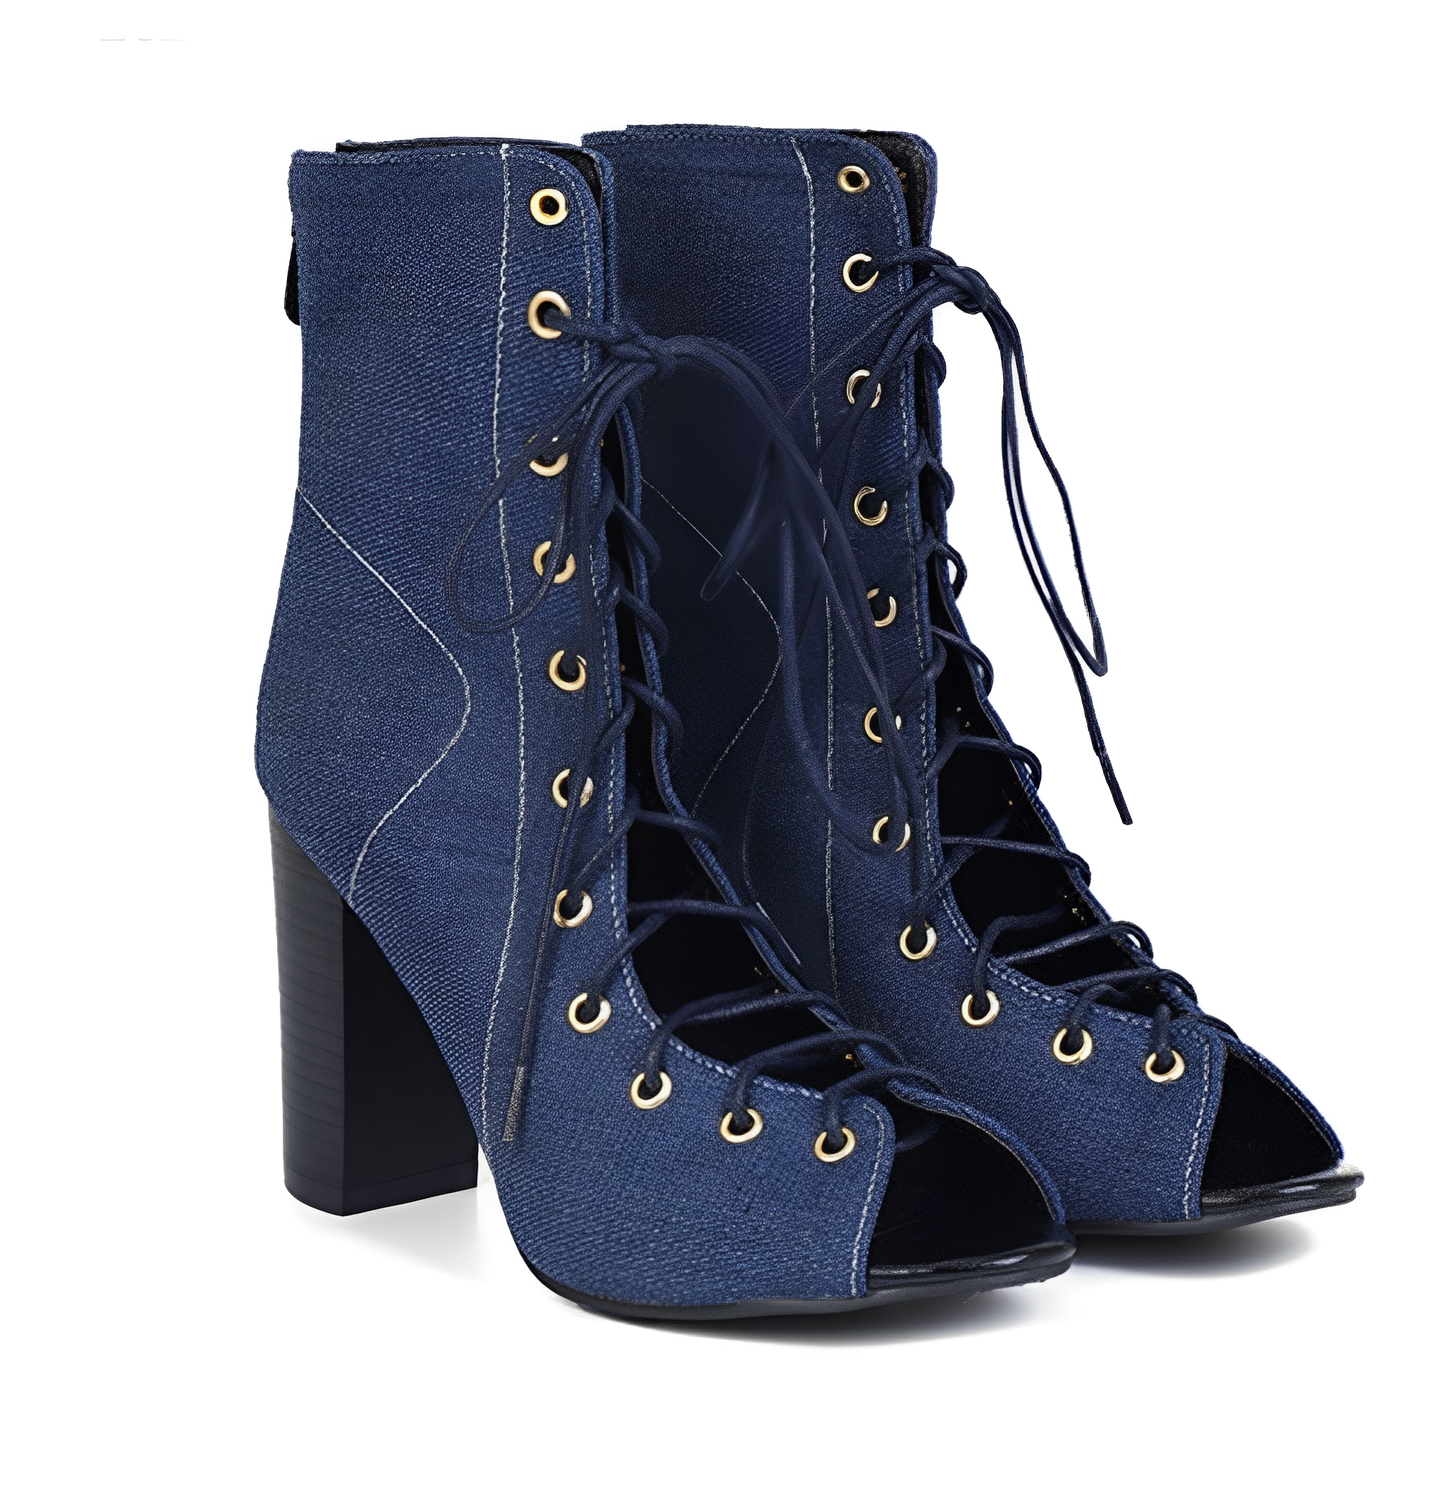 Summer Chic Denim Boots Sandals - Lace-Up Ankle Boots with Peep Toe Design